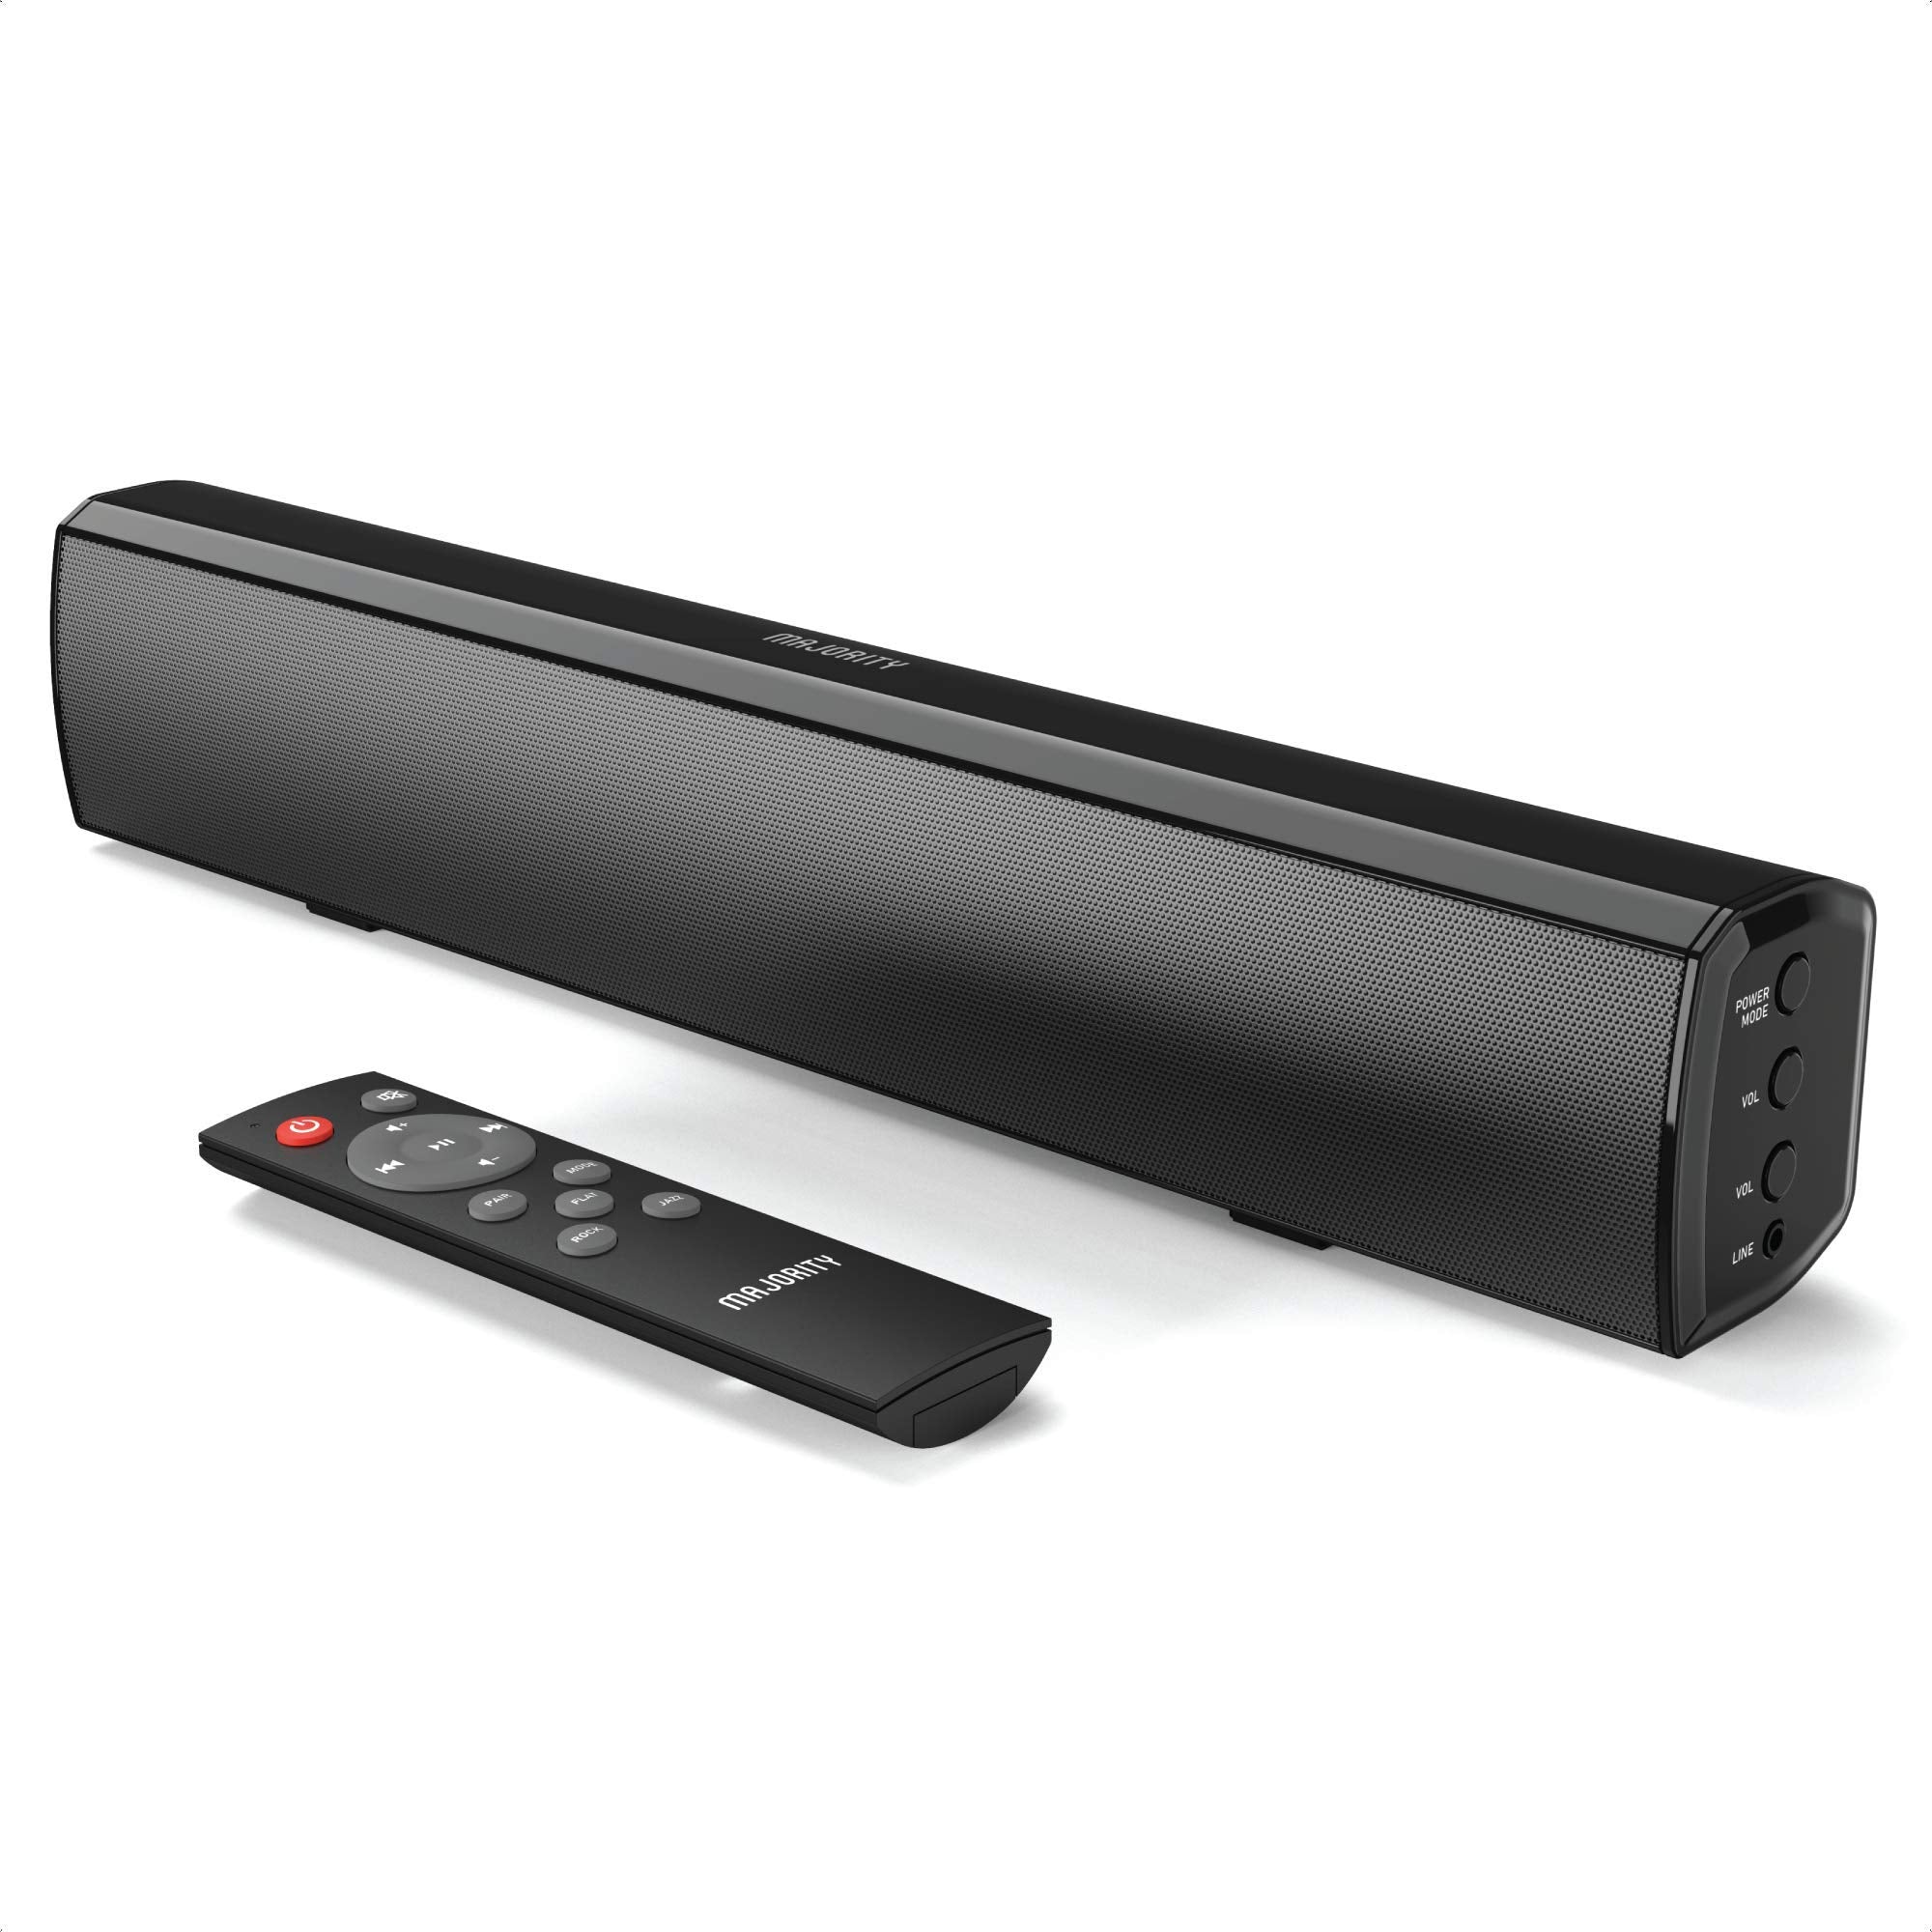 Majority Bowfell Bluetooth Sound Bar for TV | 50 Watts Powerful 2.1 Stereo Sound | EQ Control, Bluetooth, Optical & RCA Connection with USB & AUX Playback | Gaming TV Soundbar Speaker